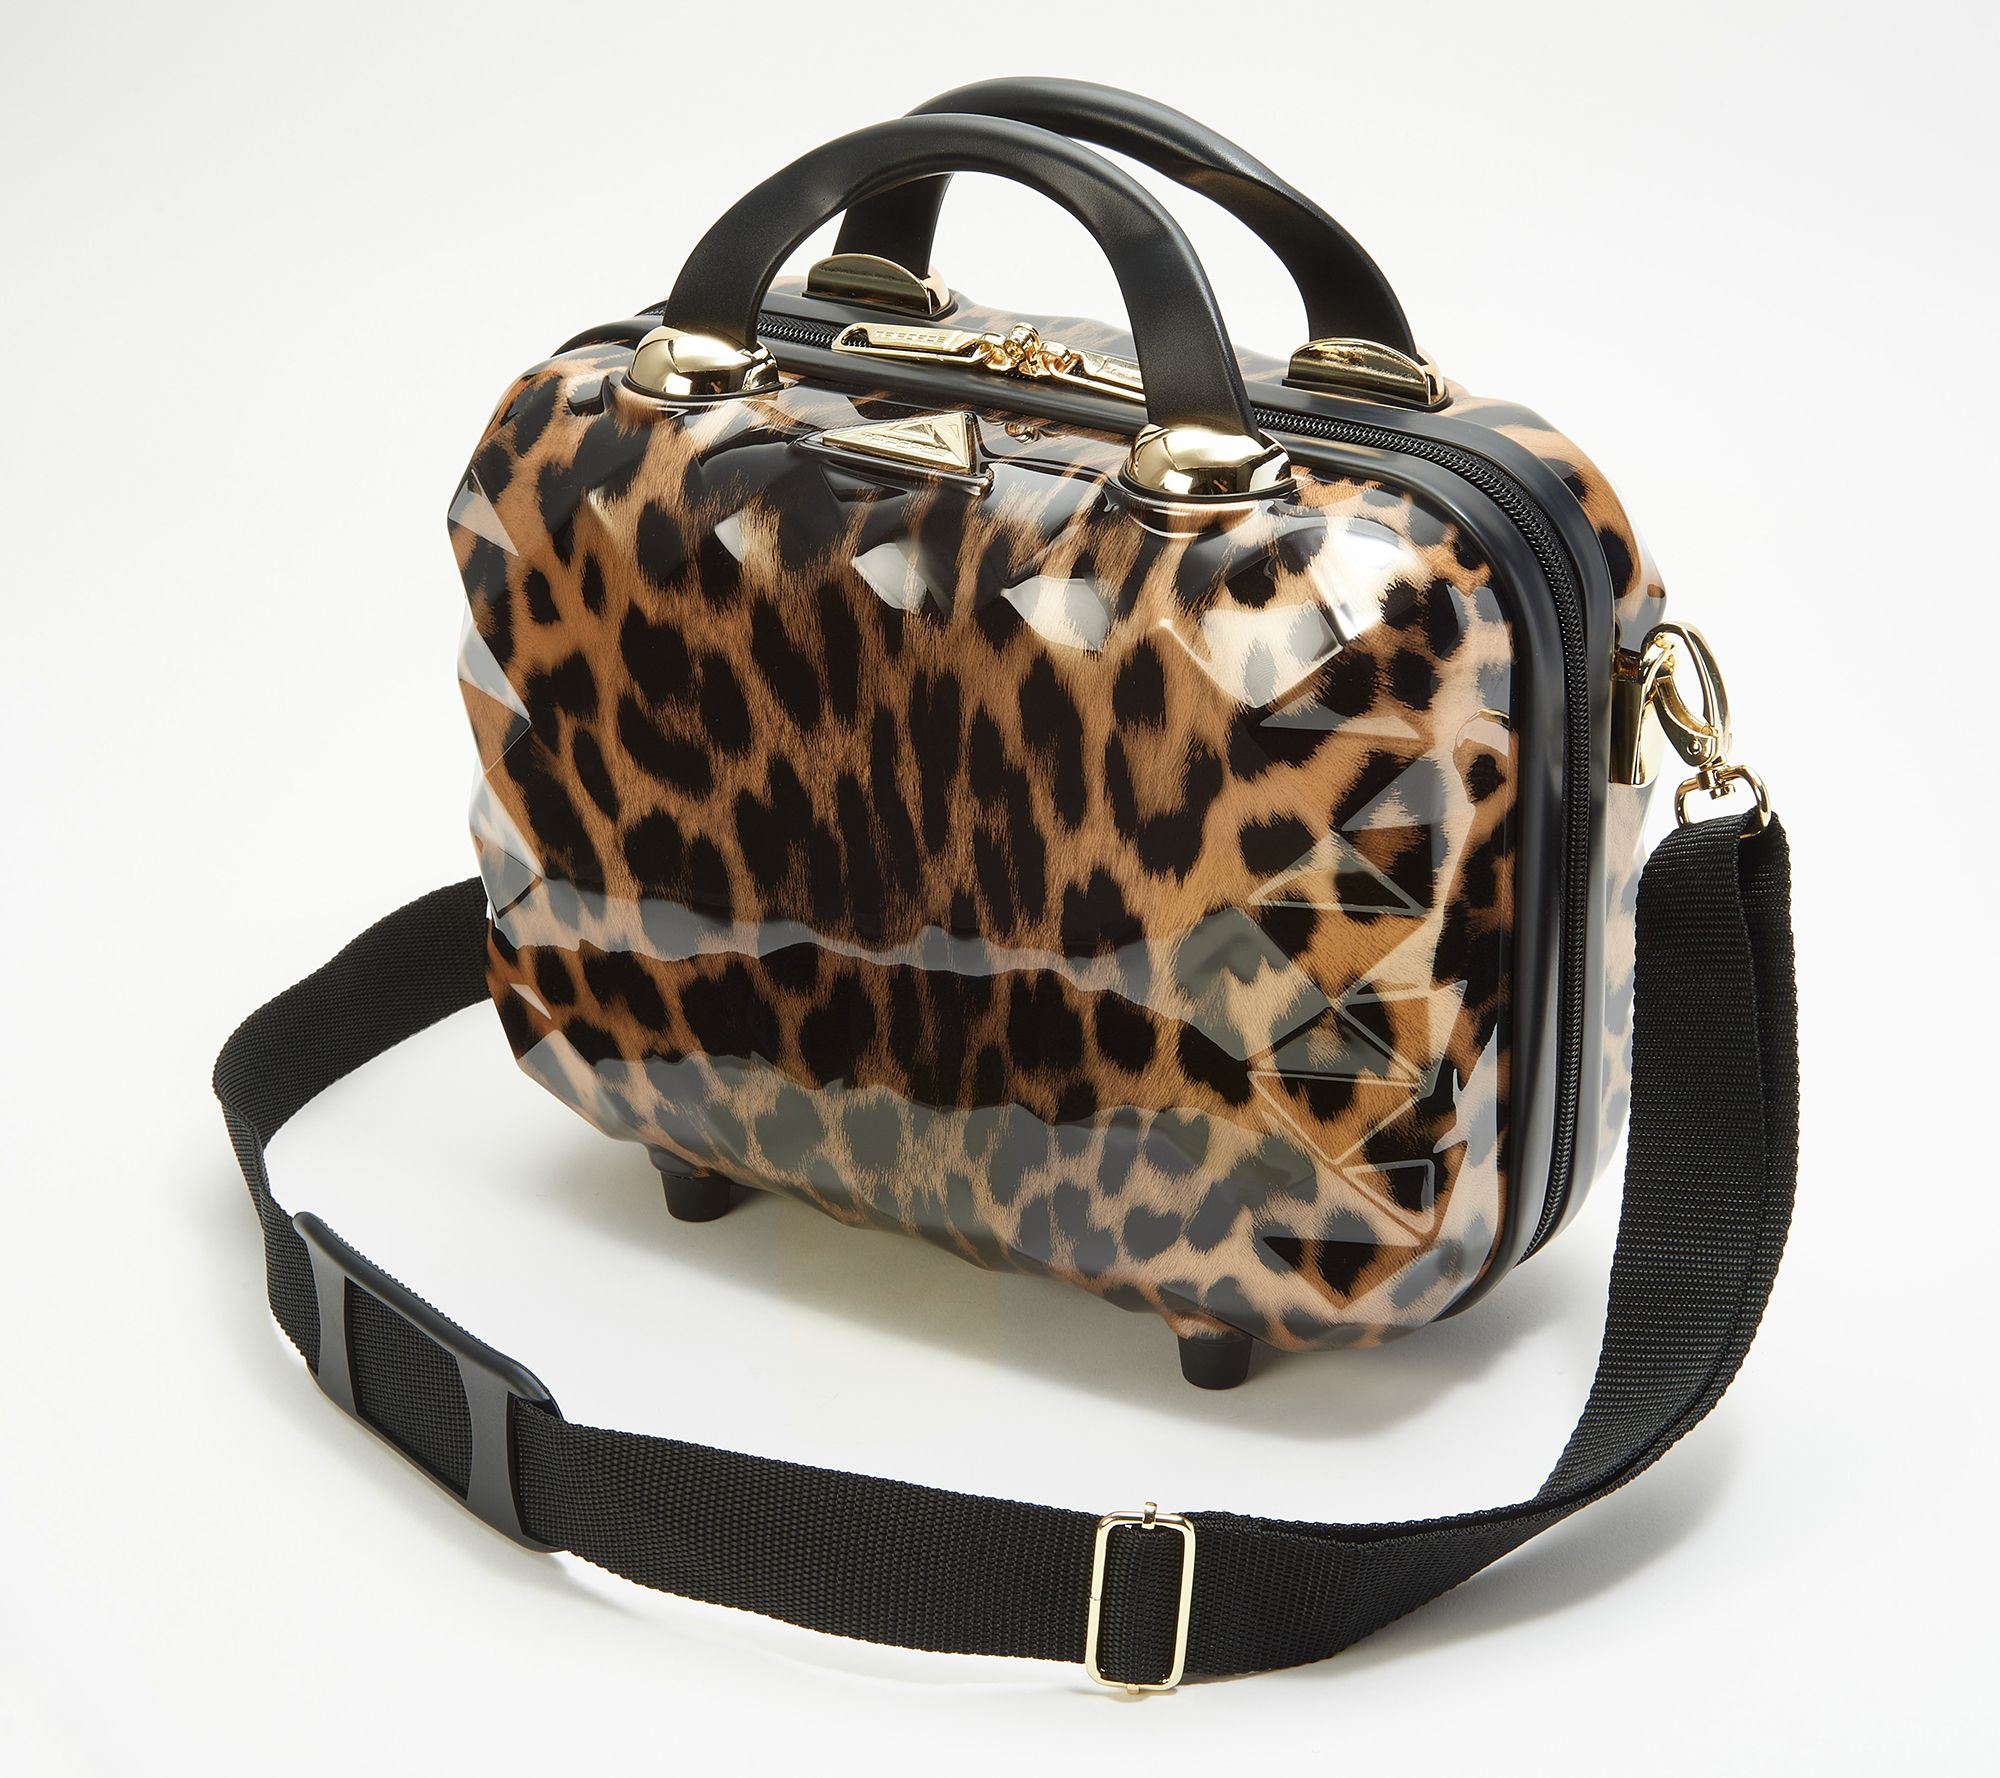 Wholesale Cosmetic Cases & Travel Bags - Free Shipping